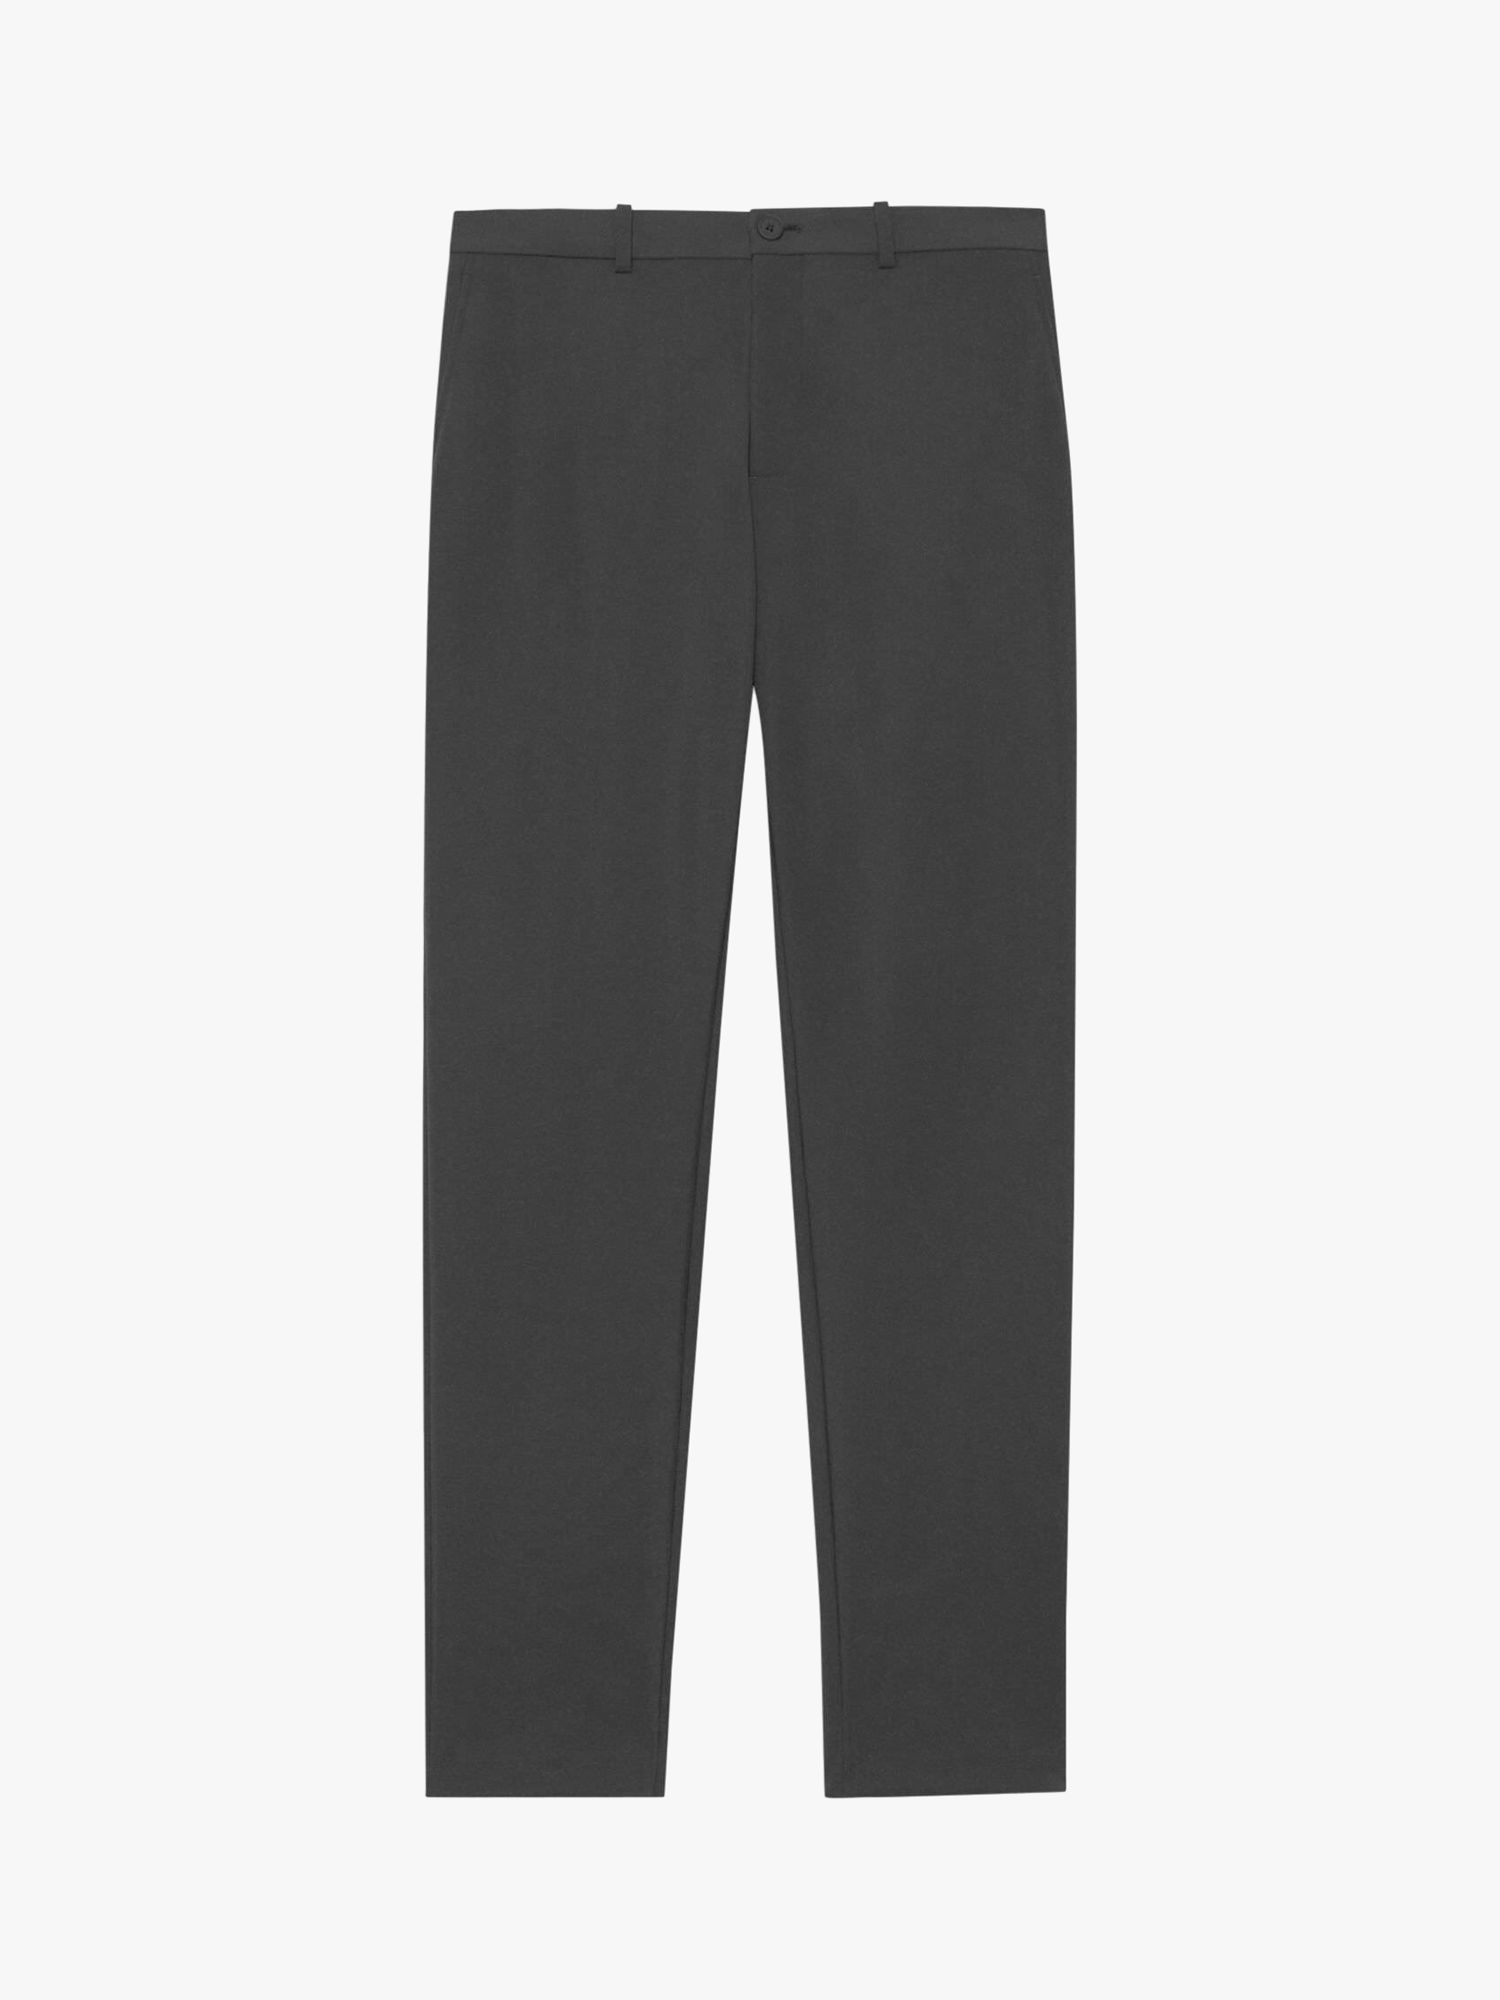 Buy Theory Zaine Tailored Trousers Online at johnlewis.com